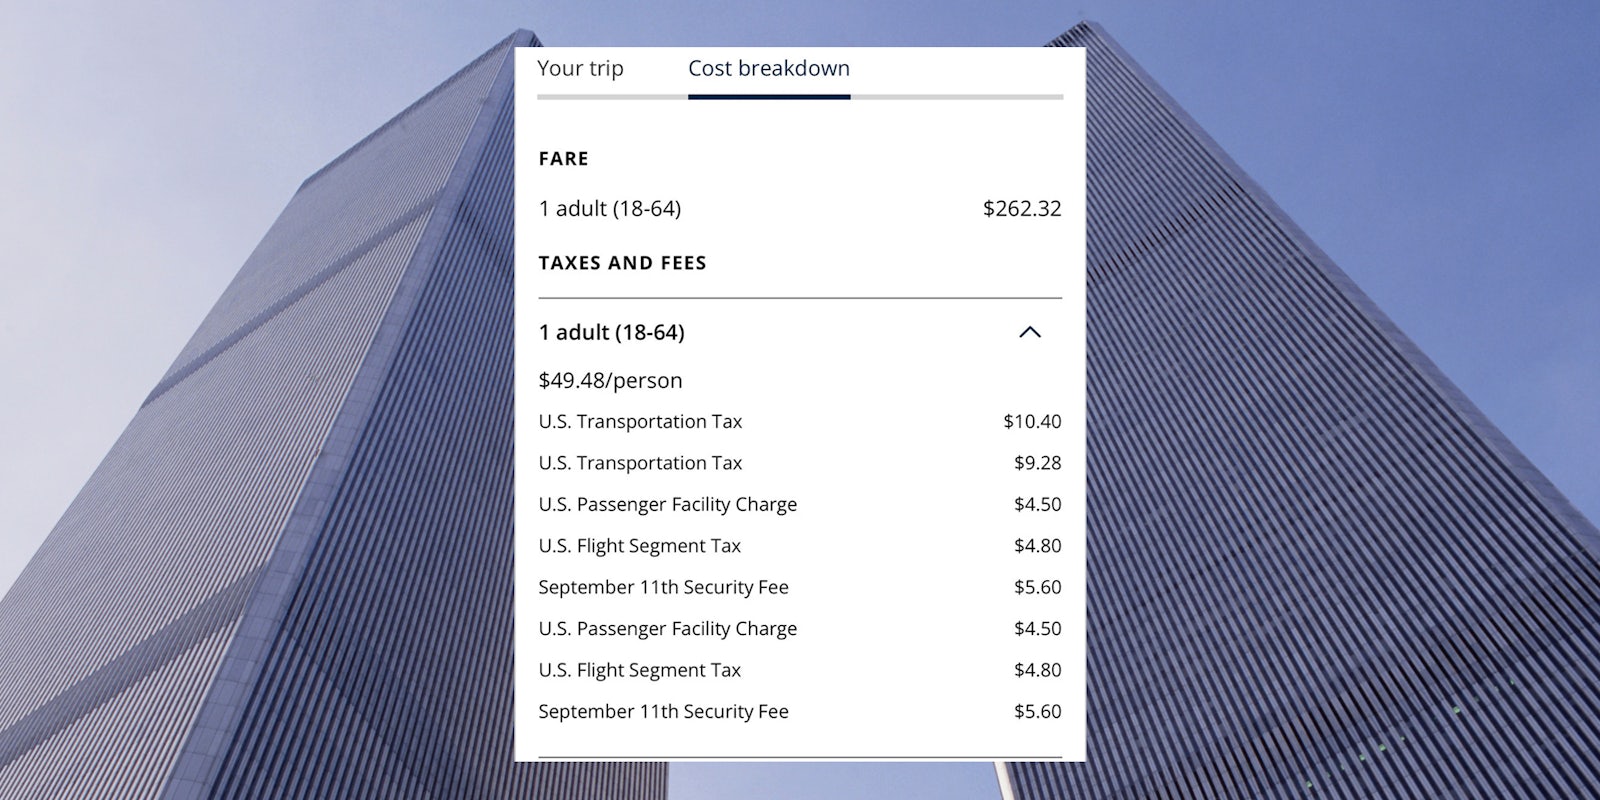 World Trade Center buildings with 'Cost breakdown' of Fare, Taxes and Fees, including two 'September 11th Security Fee $5.60'